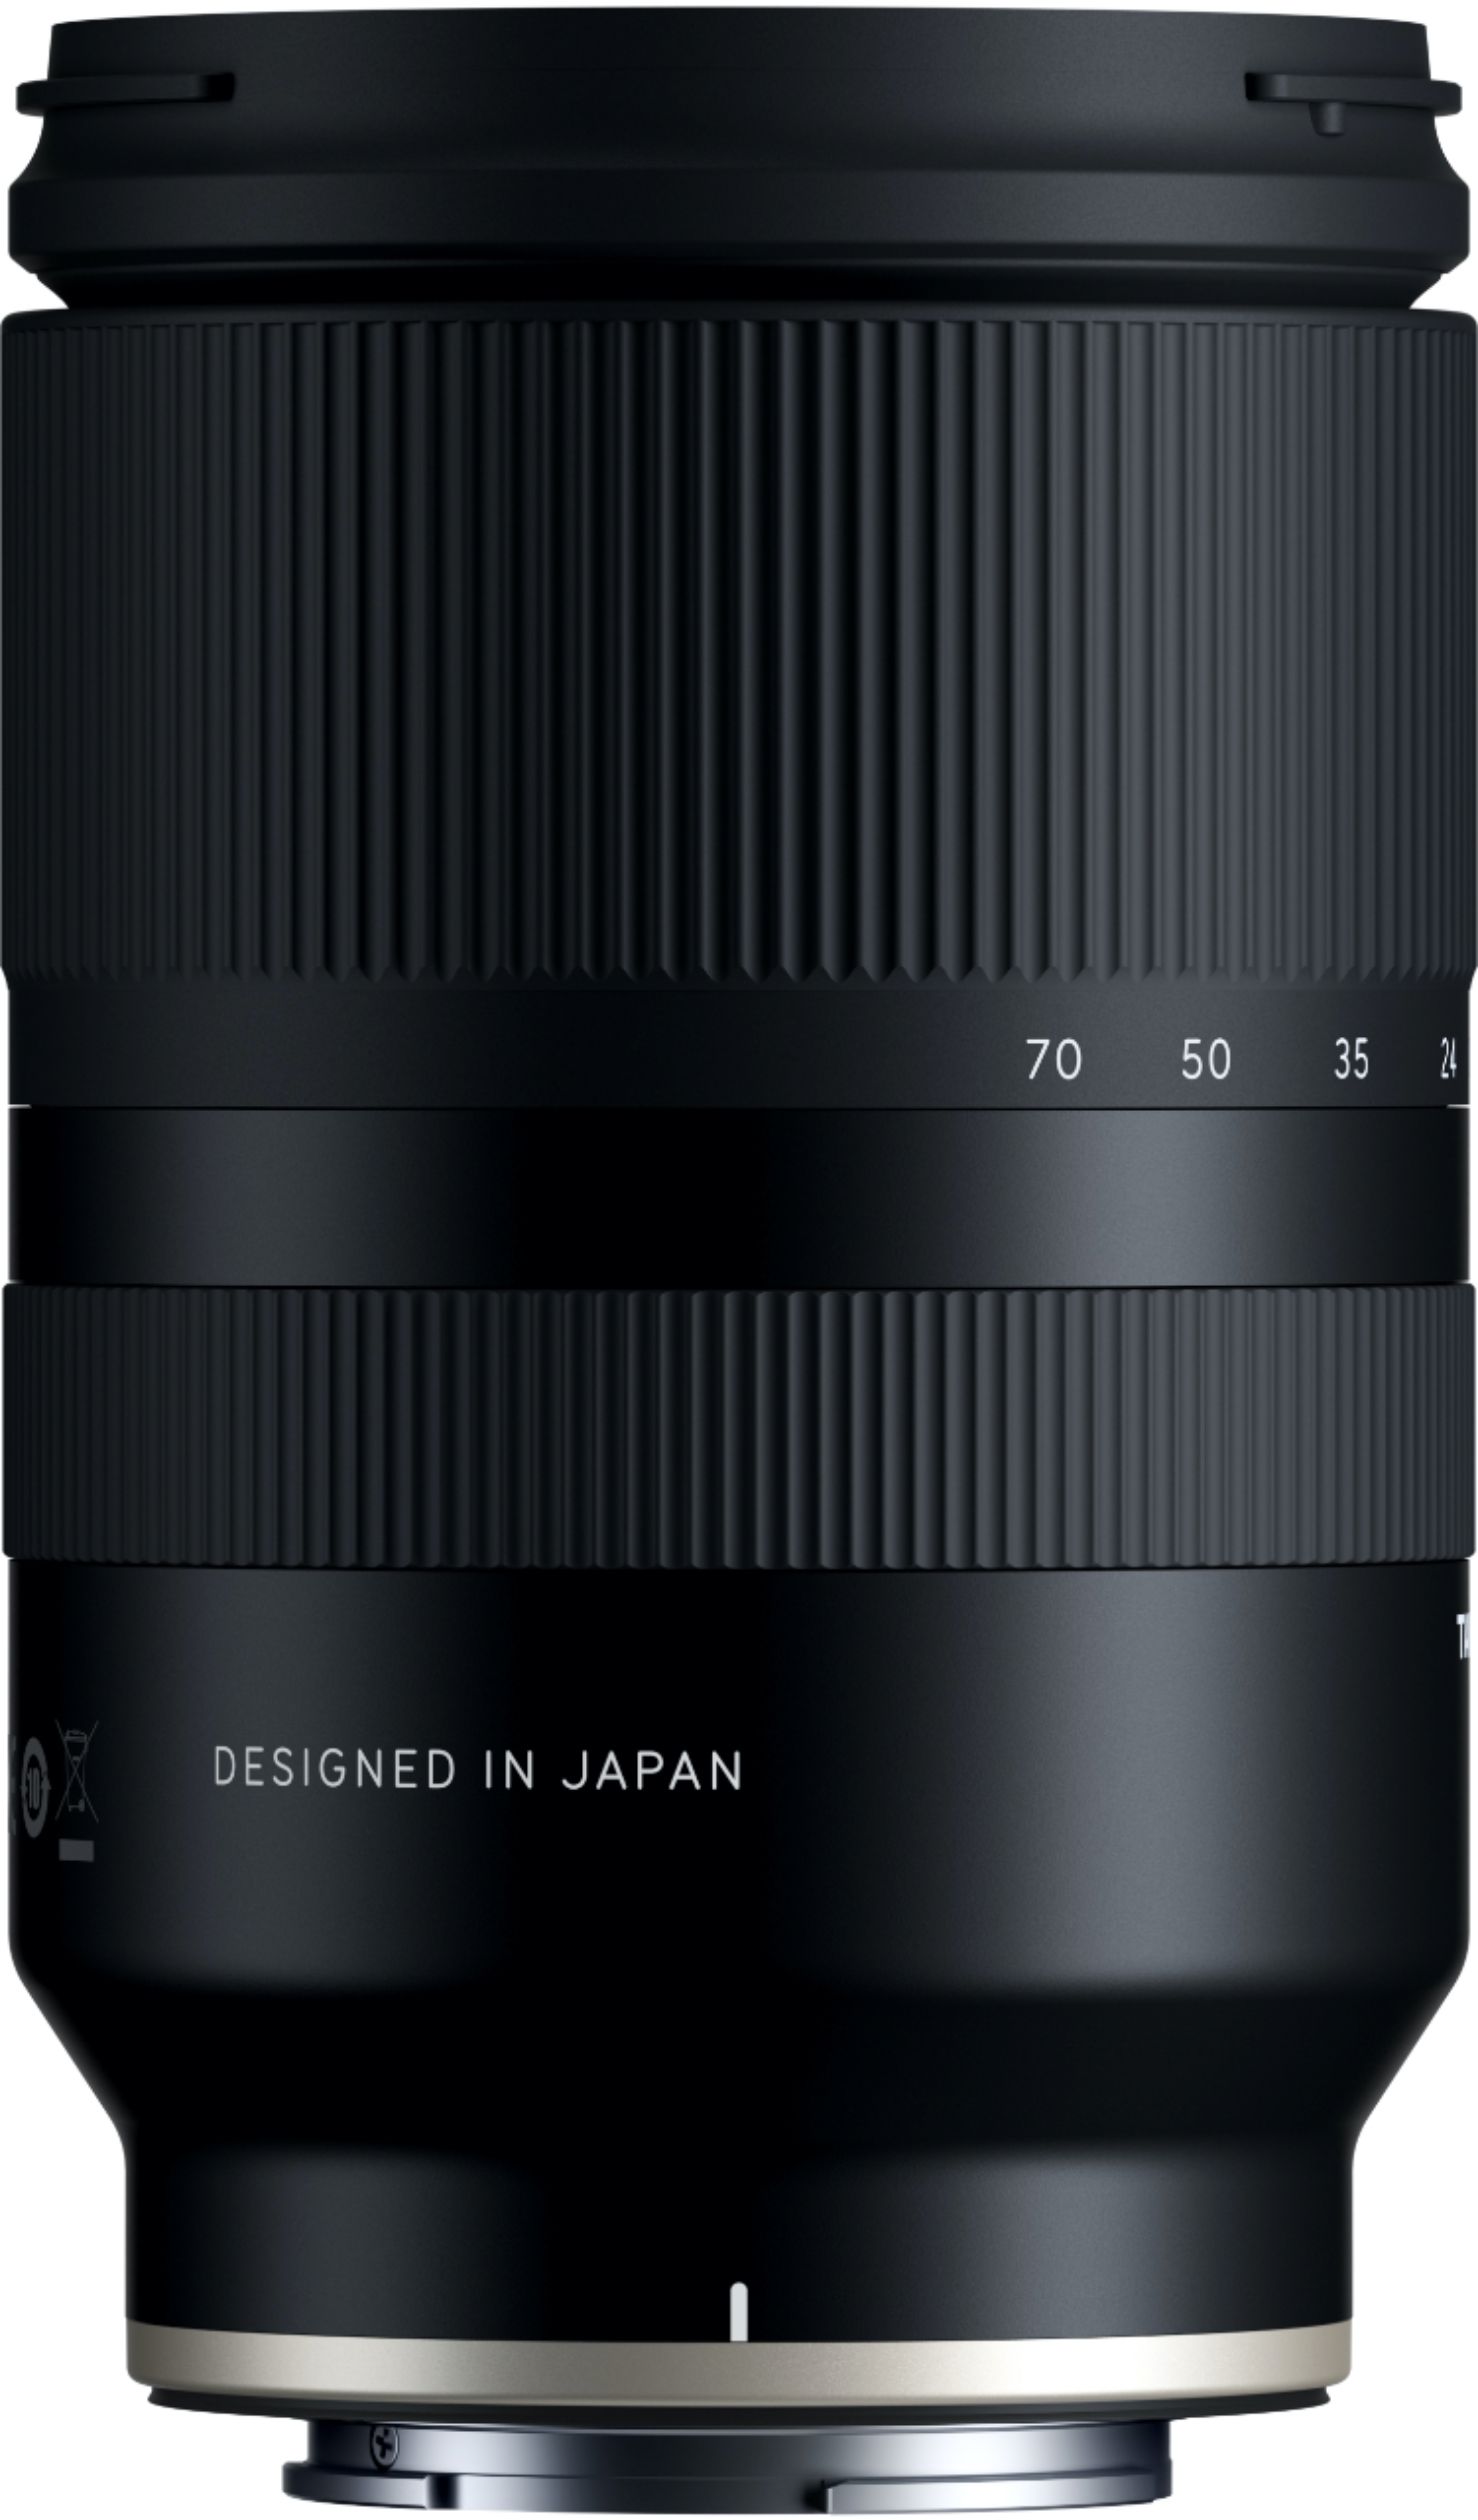 Tamron 17-70mm F/2.8 Di III-A VC RXD Standard Zoom Lens for Sony E 